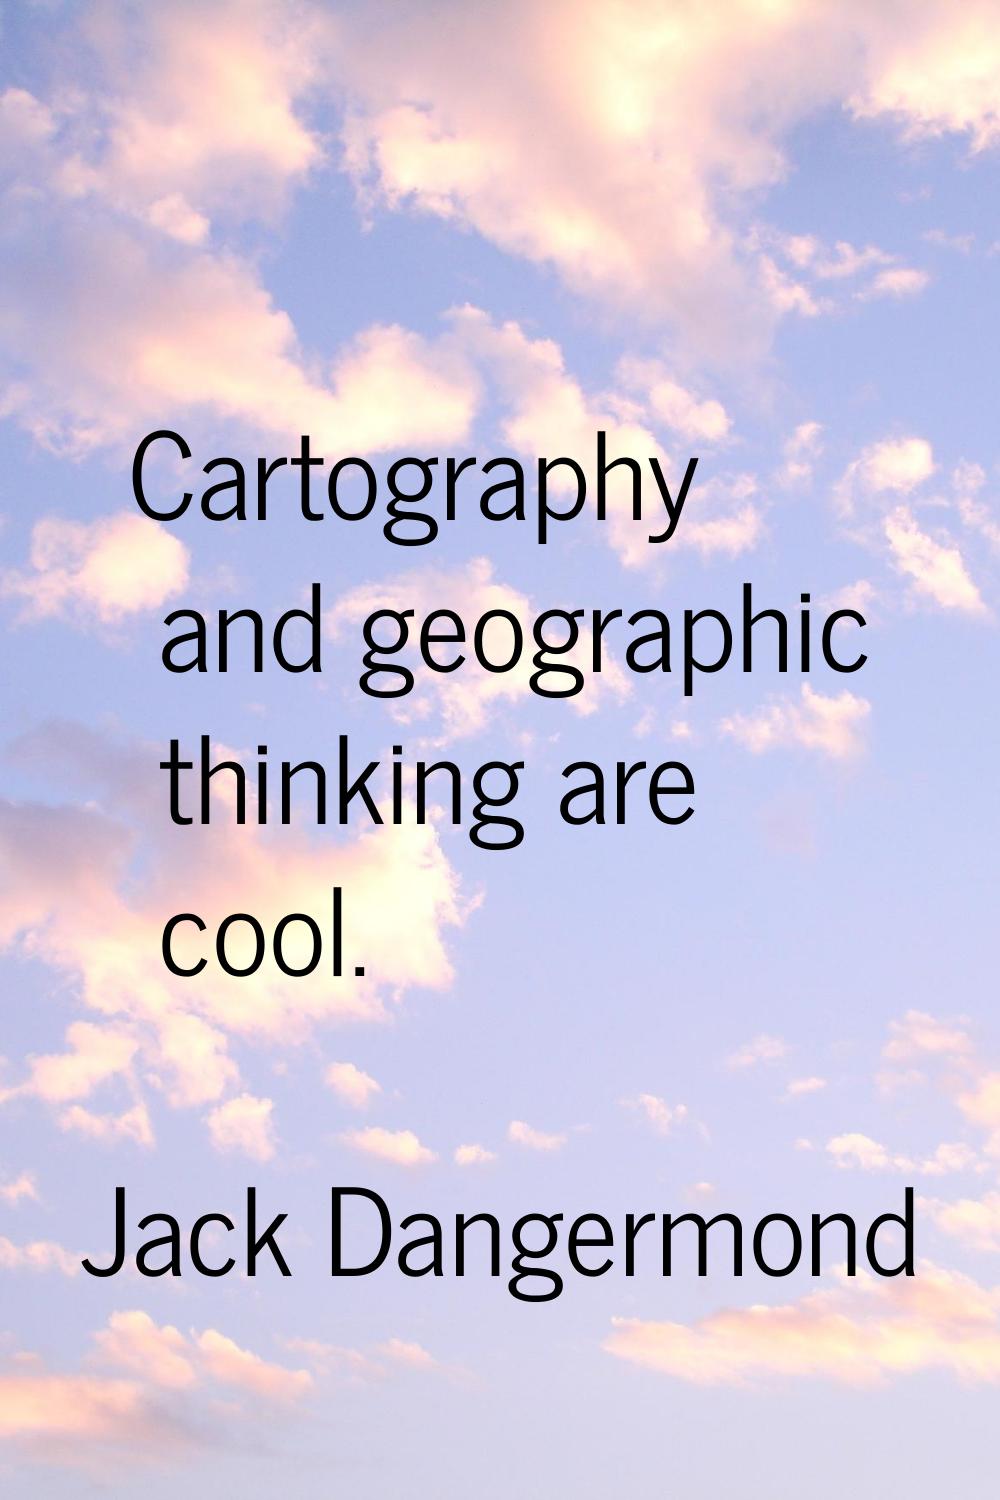 Cartography and geographic thinking are cool.